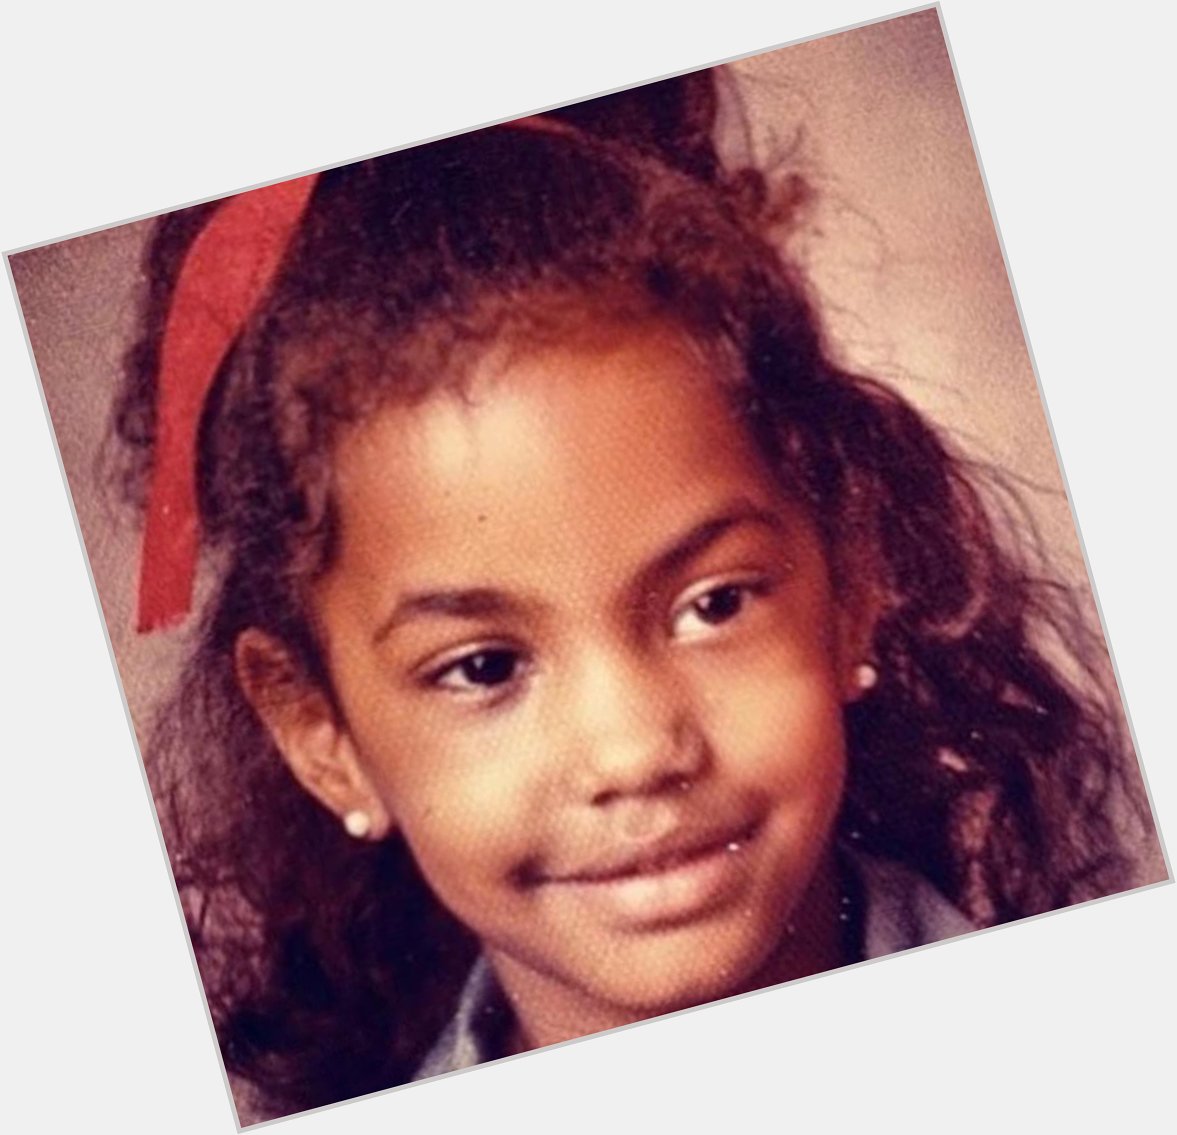 Happy Birthday to Kim Porter. Today she would have turned 50 years old. RIP 